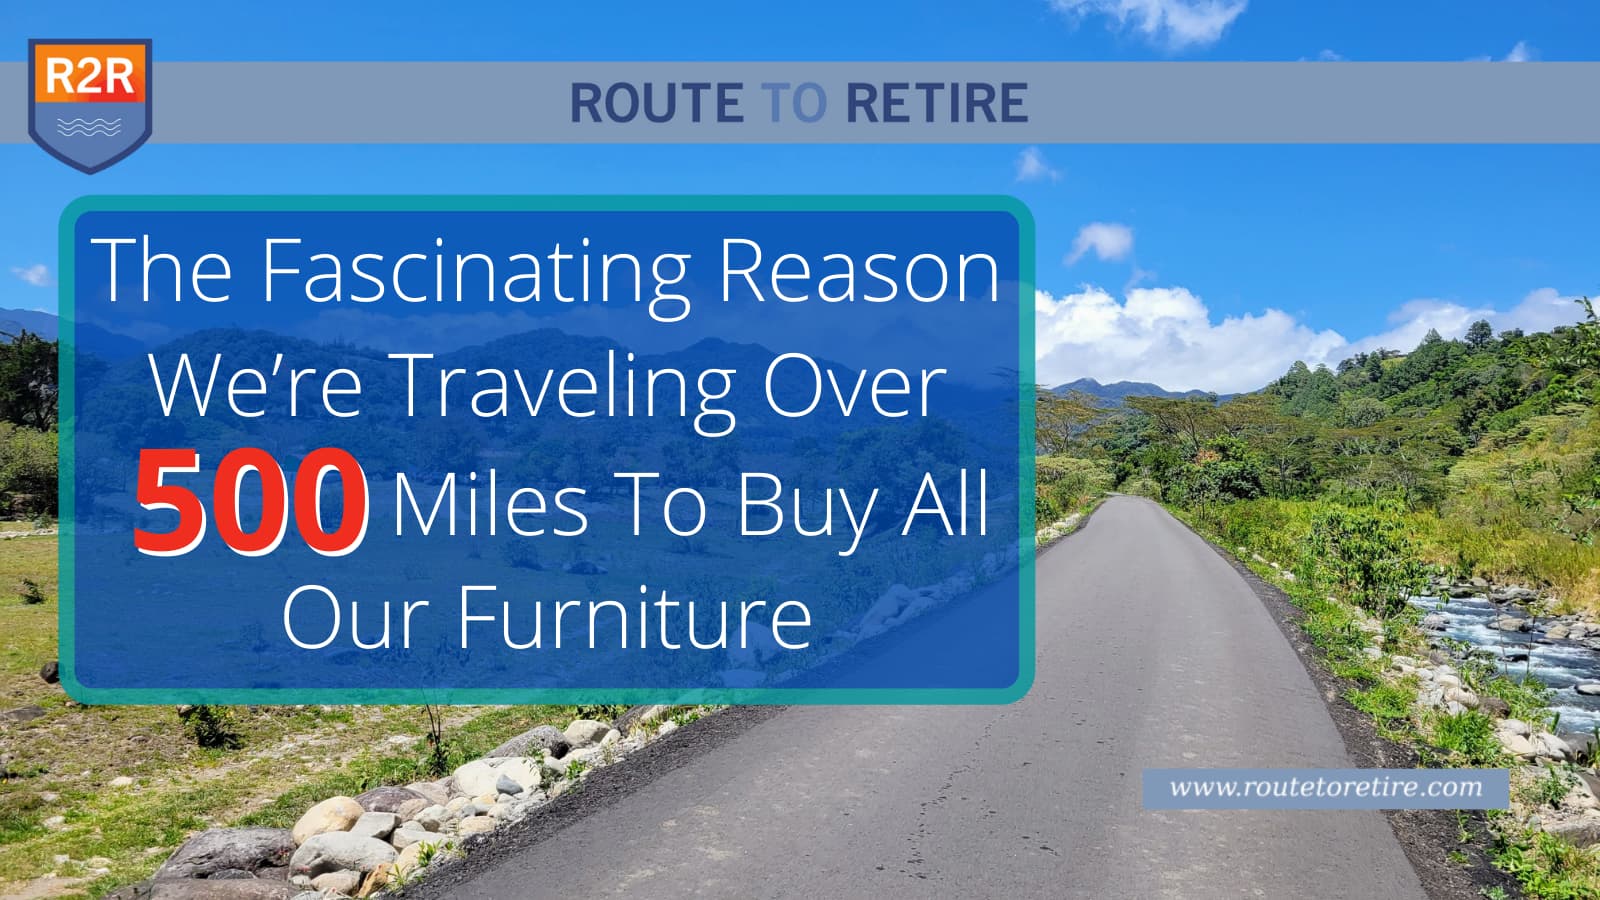 The Fascinating Reason We’re Traveling Over 500 Miles To Buy All Our Furniture